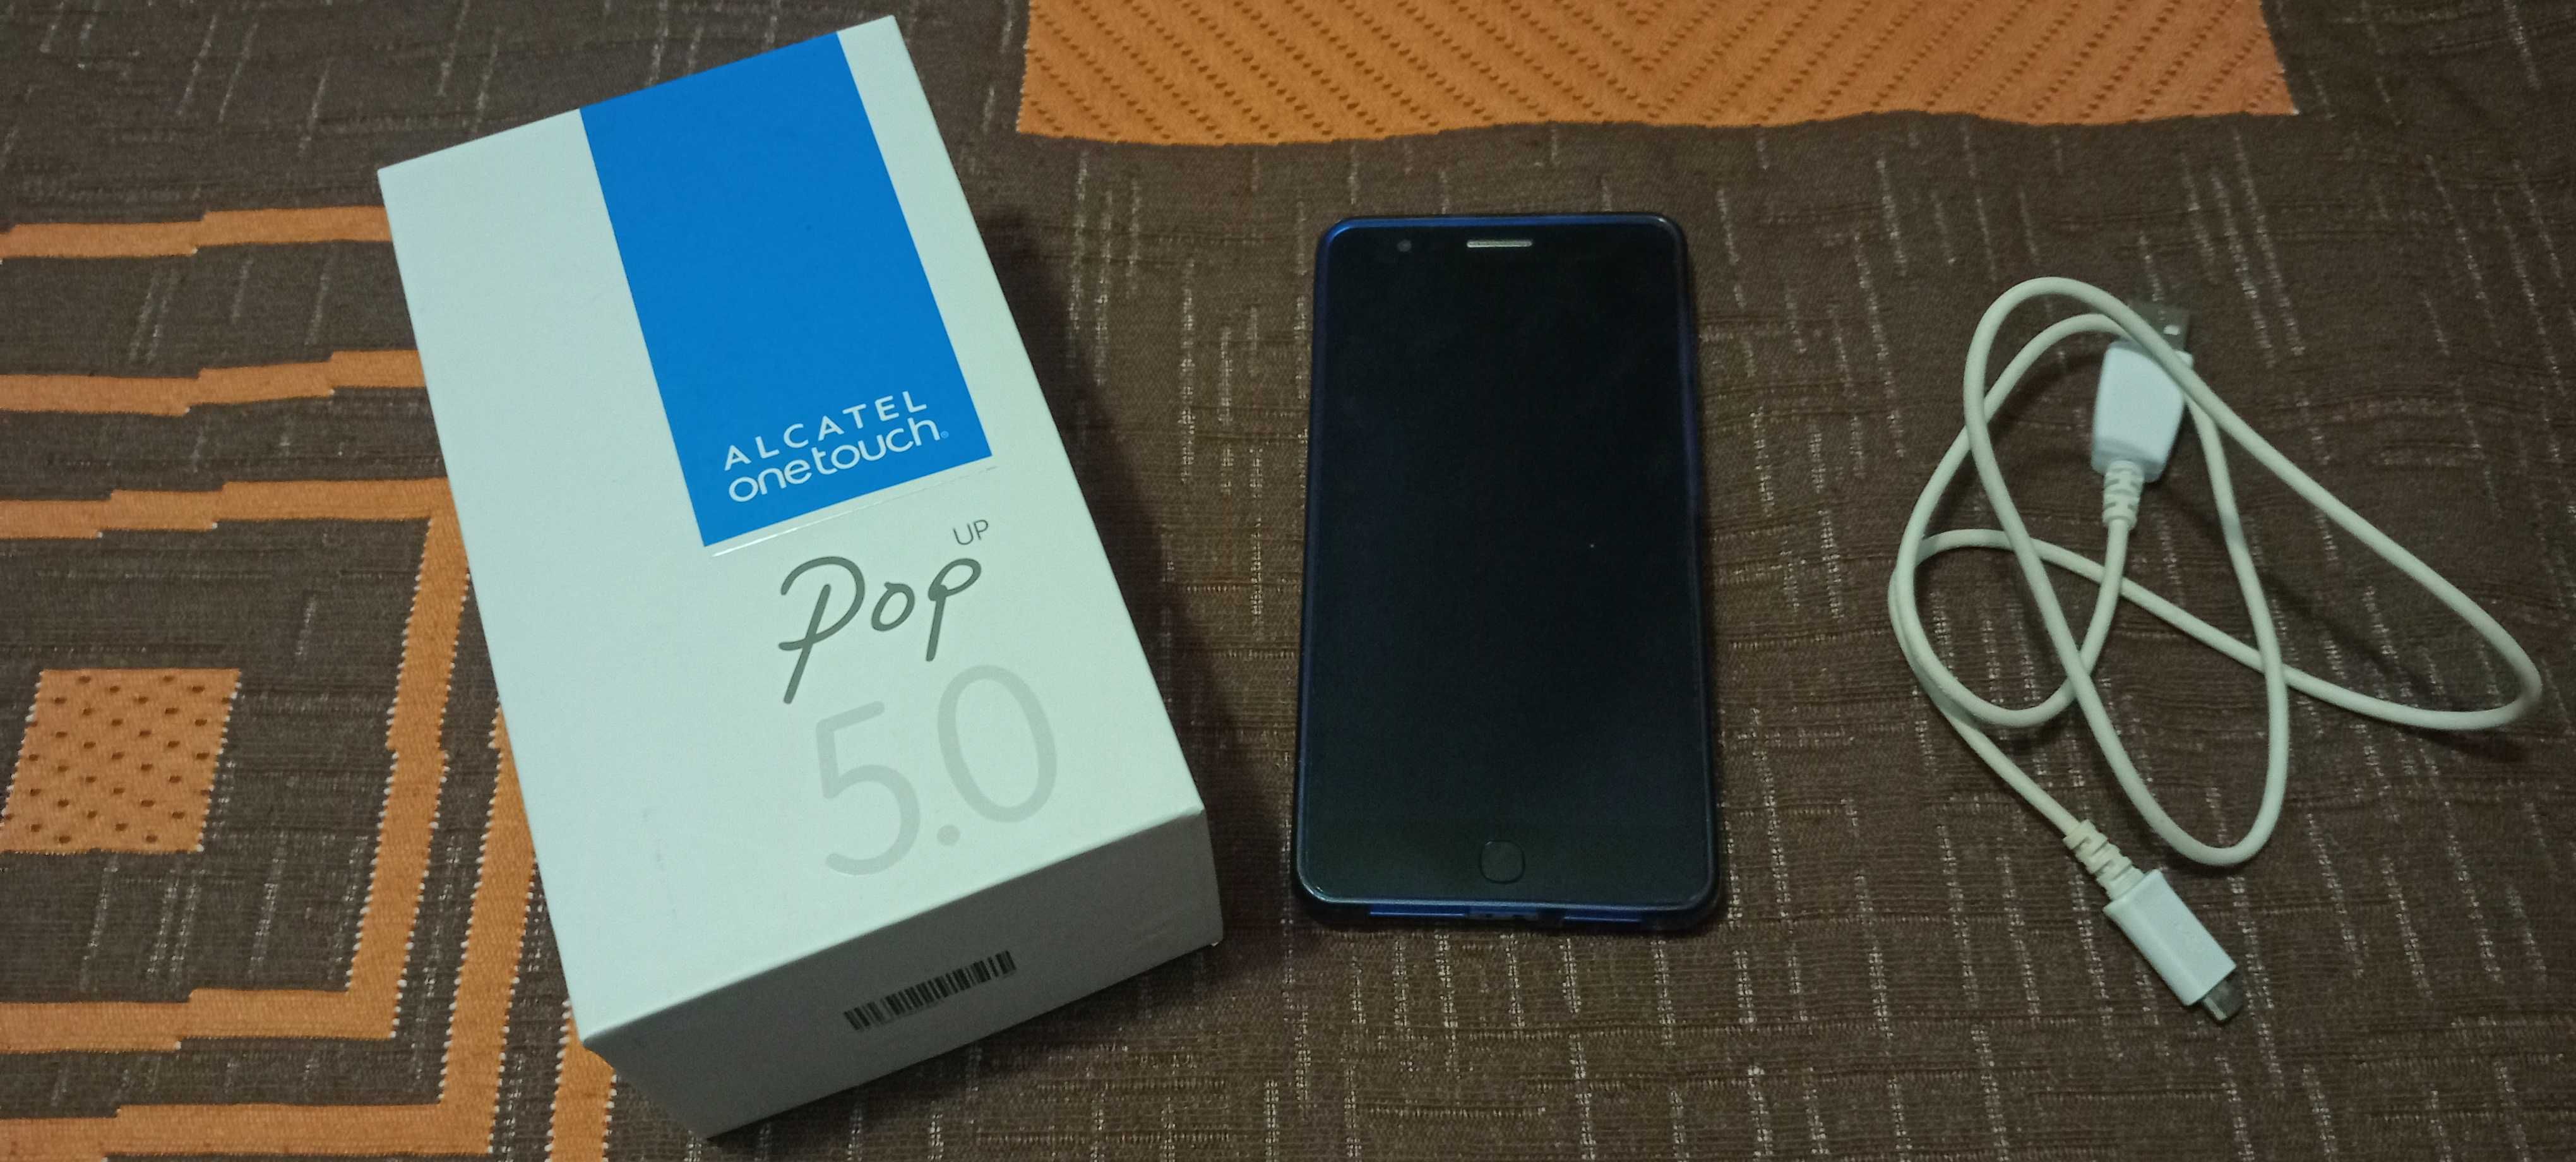 Alcatel onetouch pop up